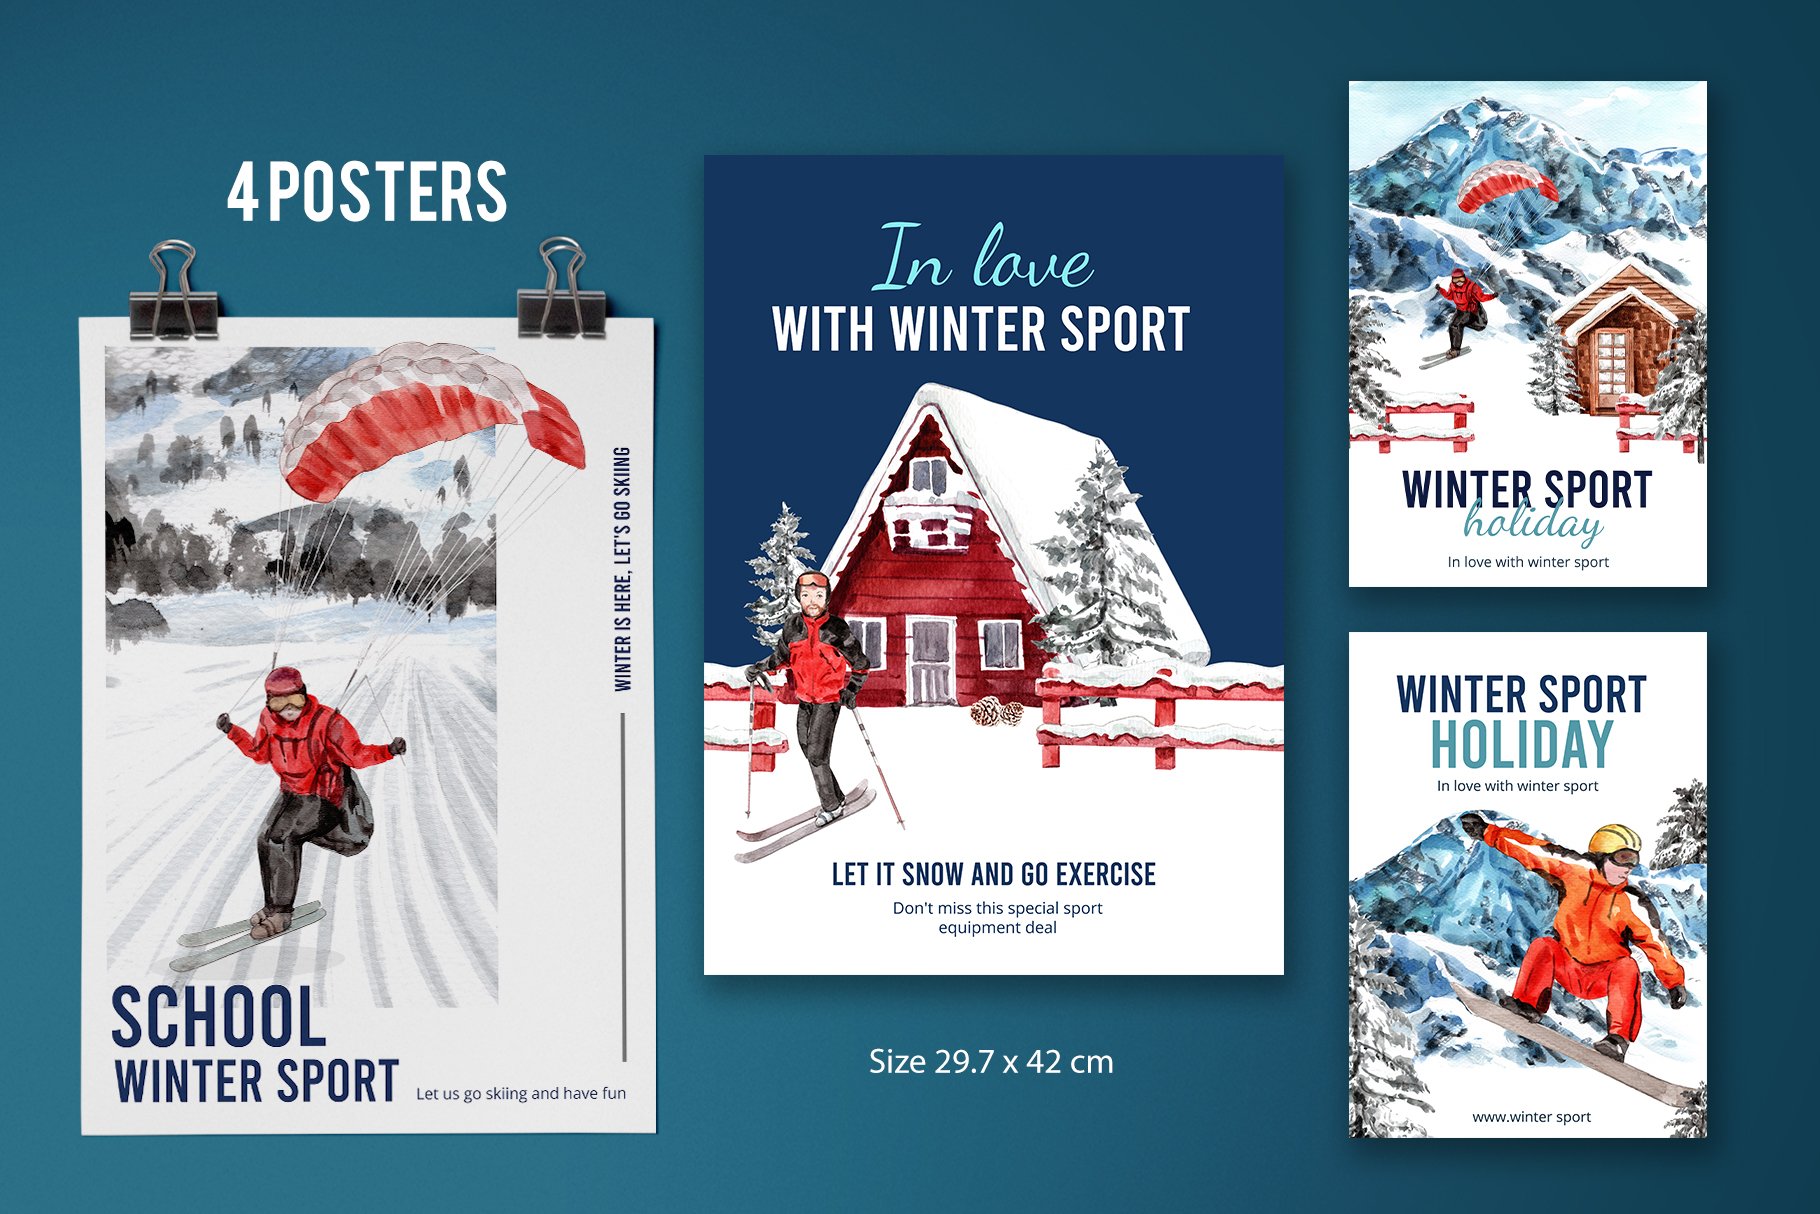 So stylish winter sport posters.